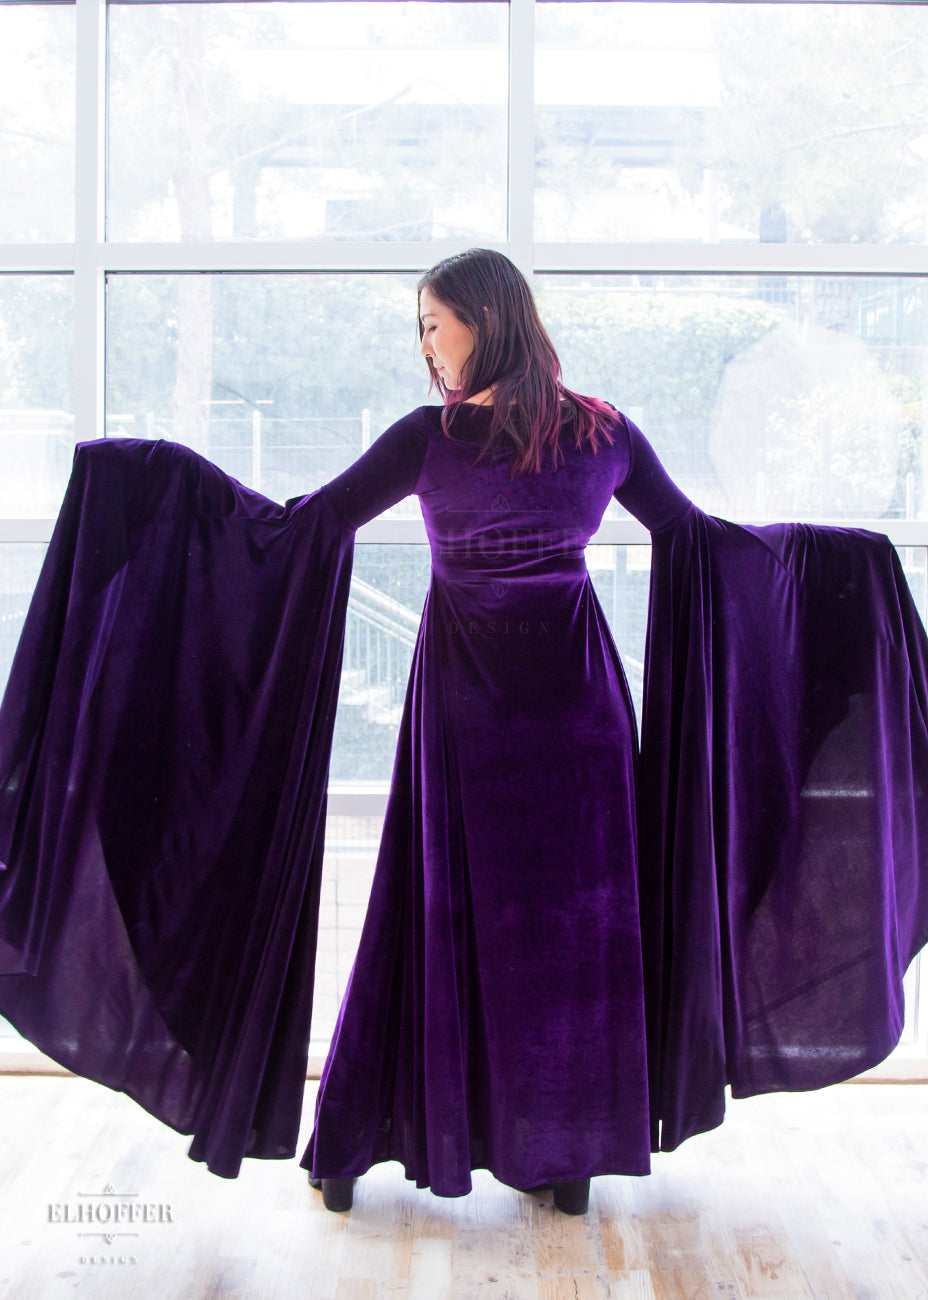 Susan models the back of the full length purple velvet dress. The sleeves are fitted to the elbow and are full and the ends fall to the floor.